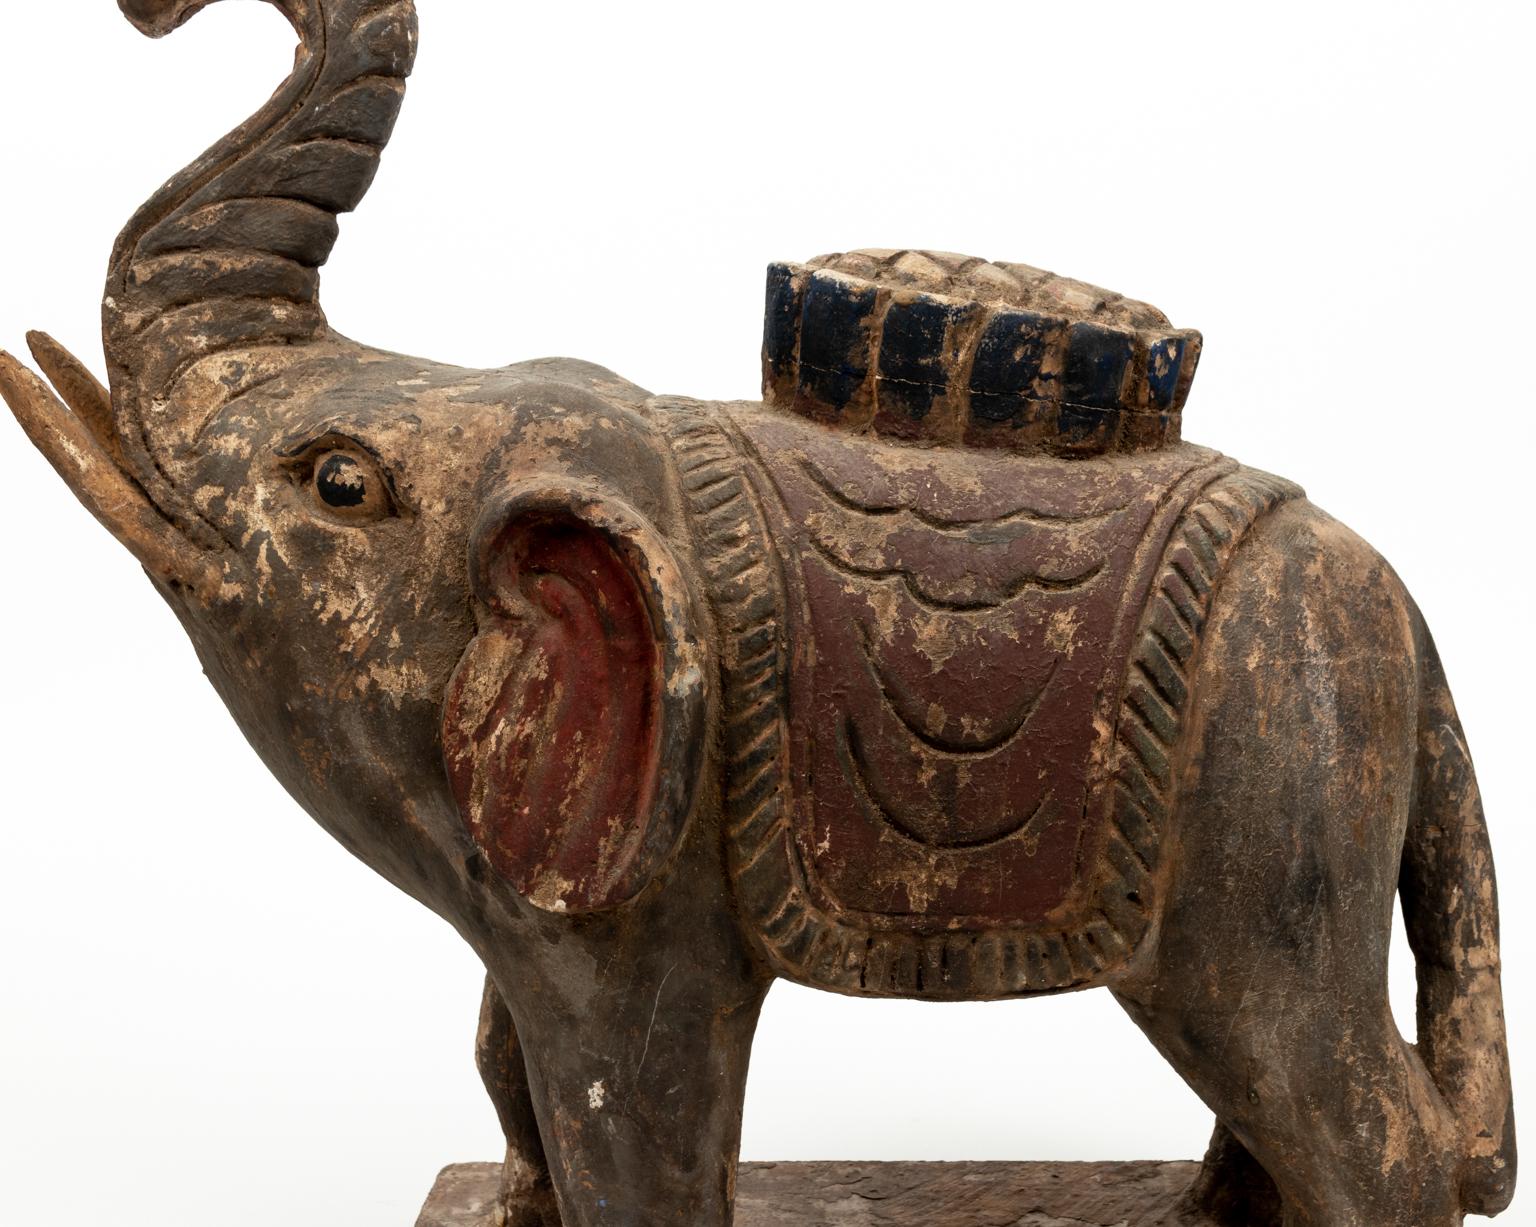 Carved and painted wooden elephant statue with raised trunk. Please note of wear consistent with age including distressed finish, minor paint loss, chips, and wood loss.